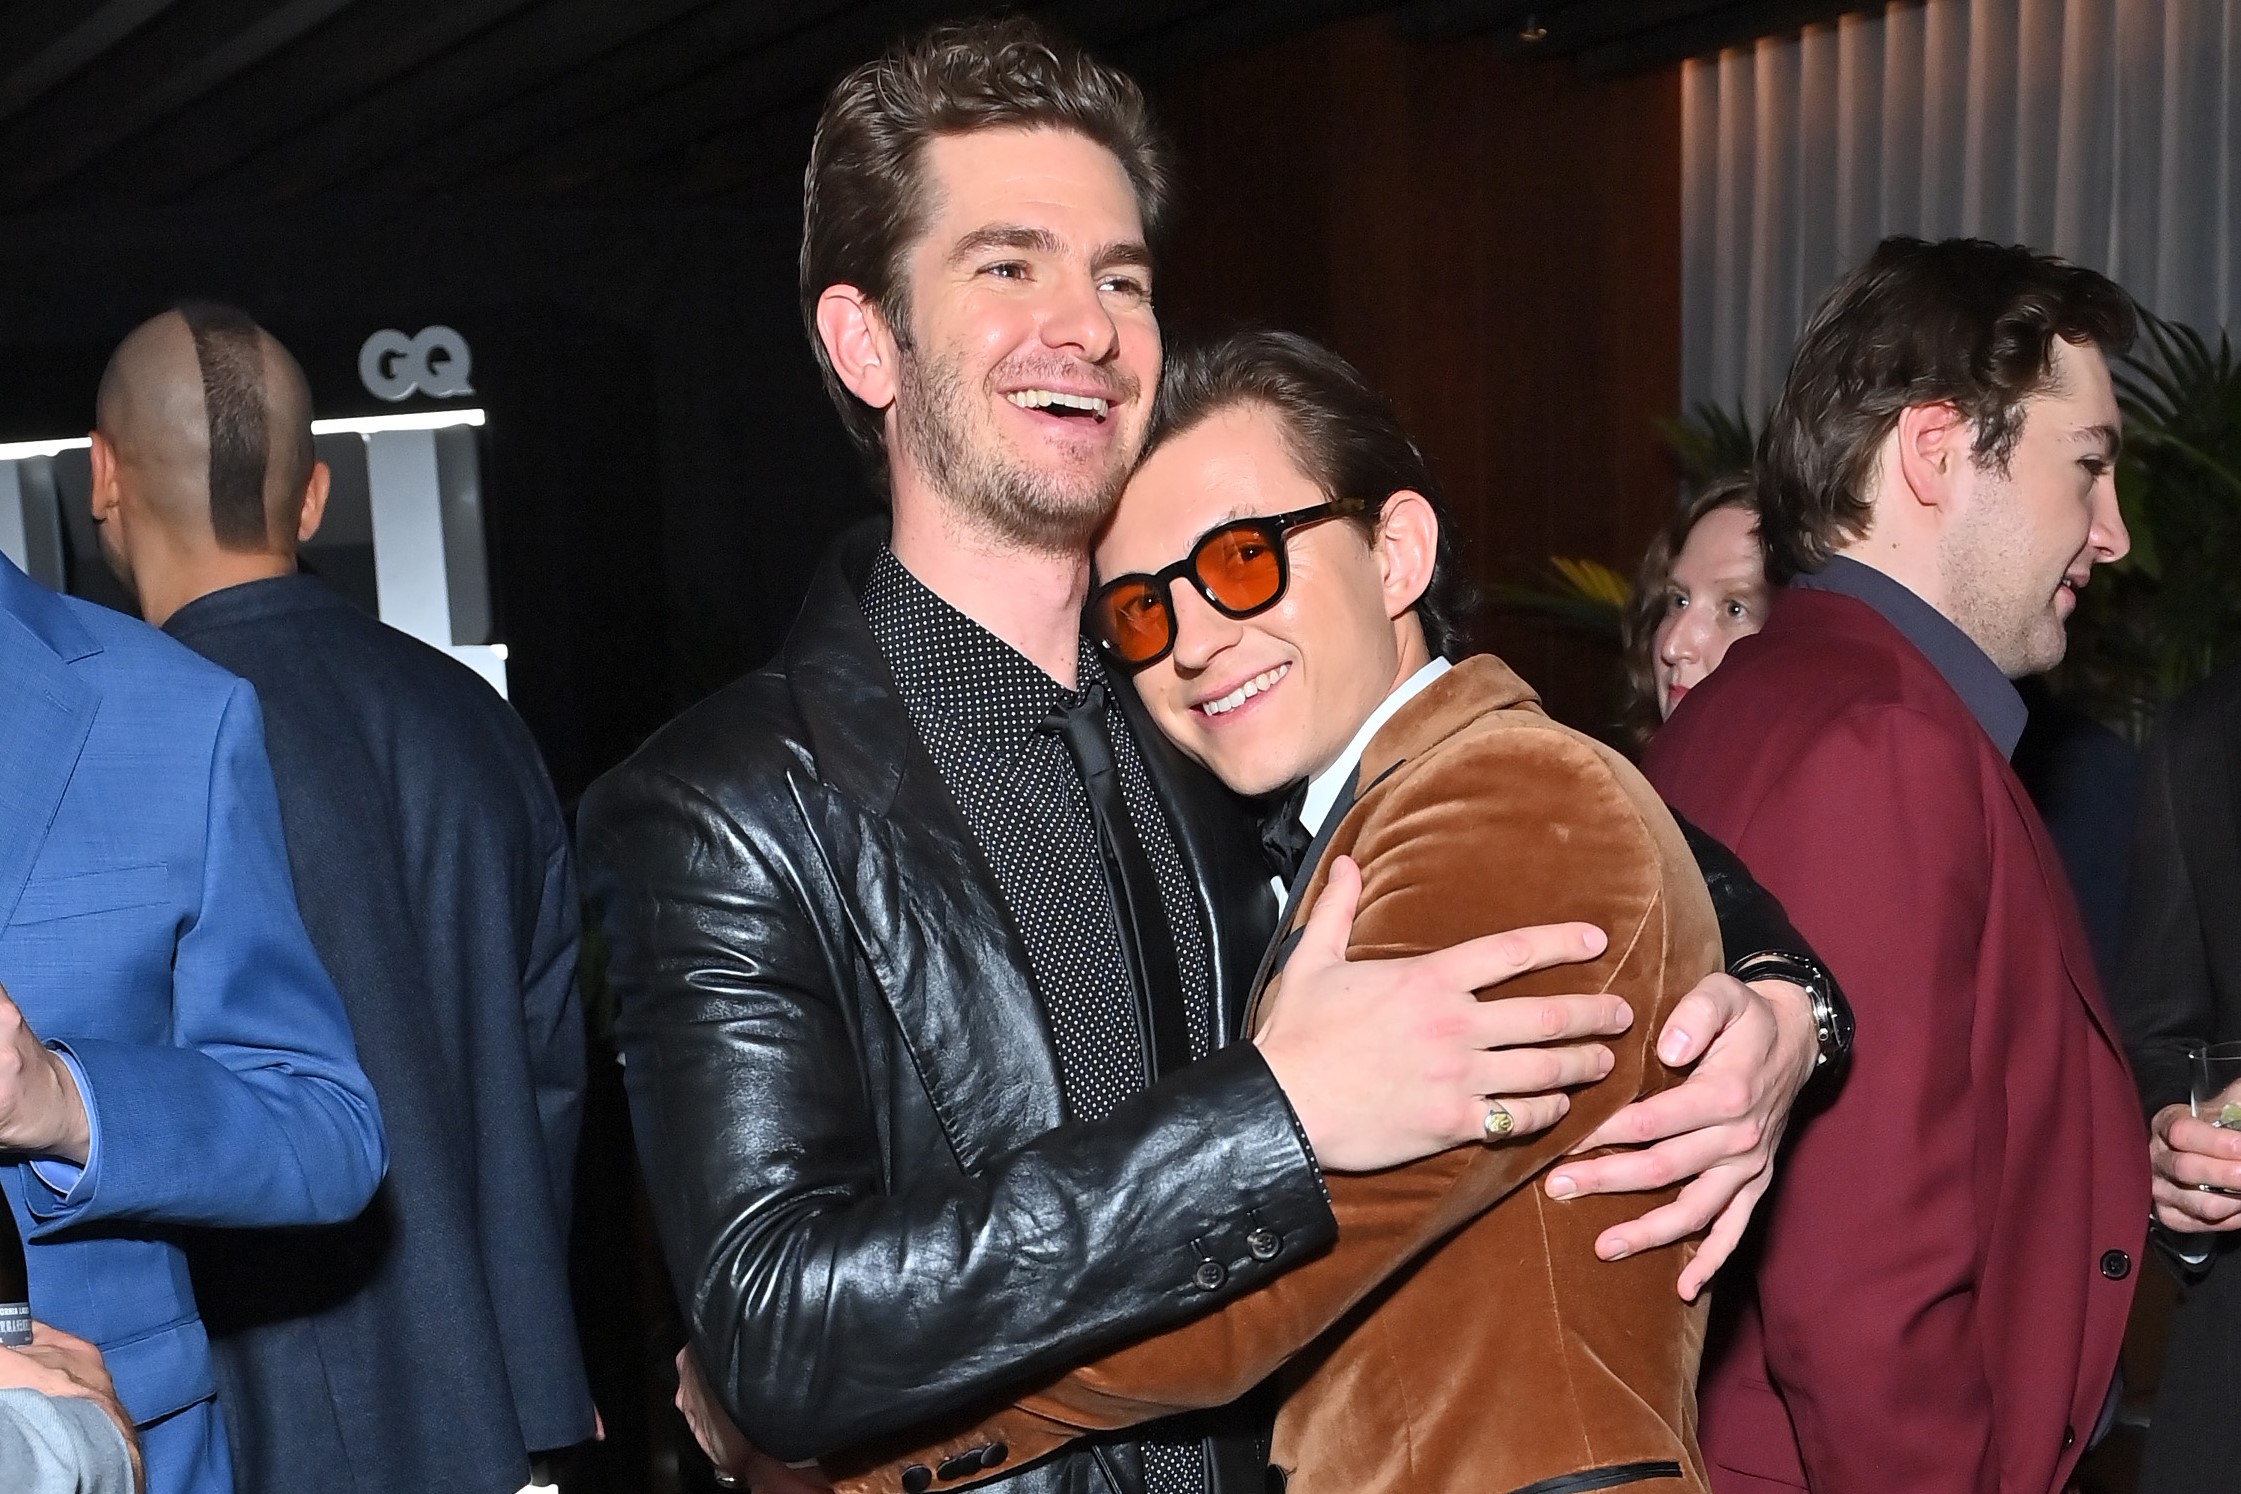 'Spider-Man: No Way Home,' which has a Blu-ray release date of April 12, stars Andrew Garfield and Tom Holland embrace. Garfield wears a black leather jacket over a black button-up shirt with white polka dots and a black tie. Holland wears a brown velvet suit jacket and orange-tinted glasses.